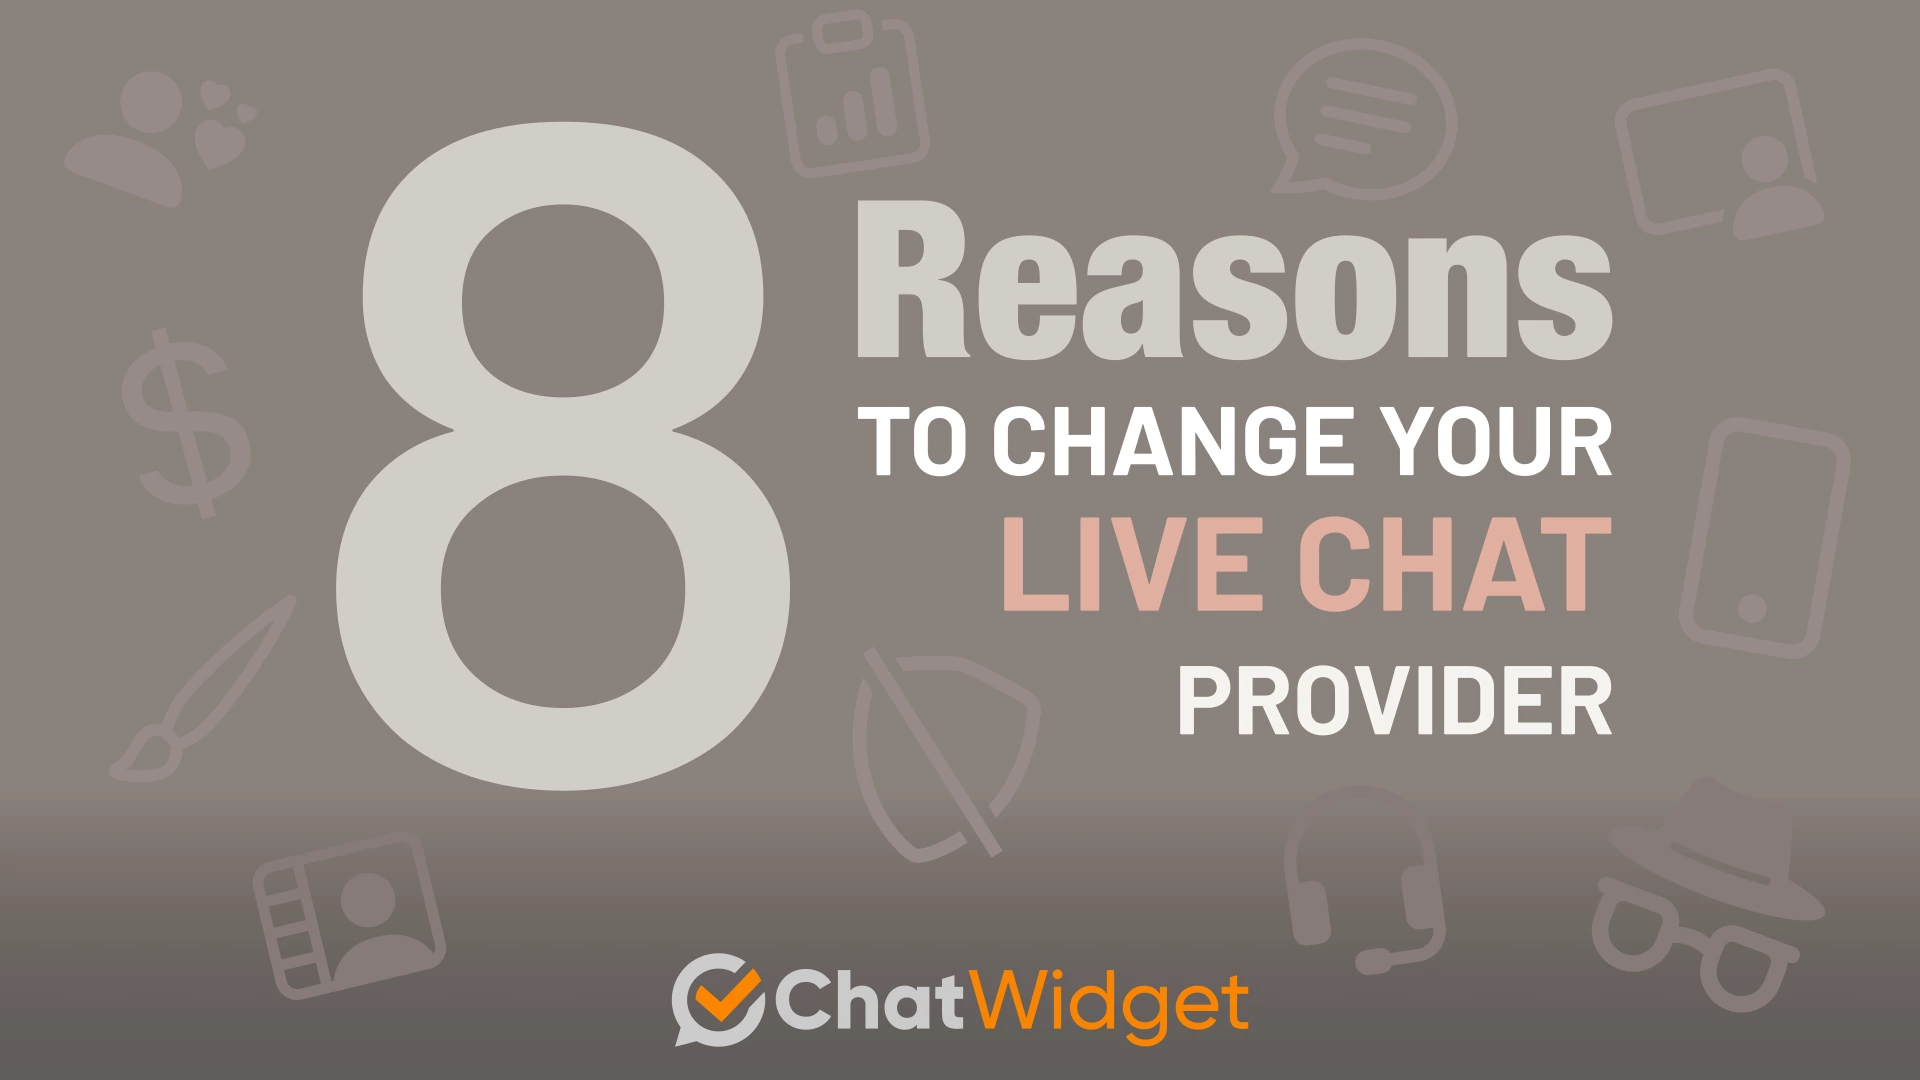 8 Reasons to Change Live Chat Provider